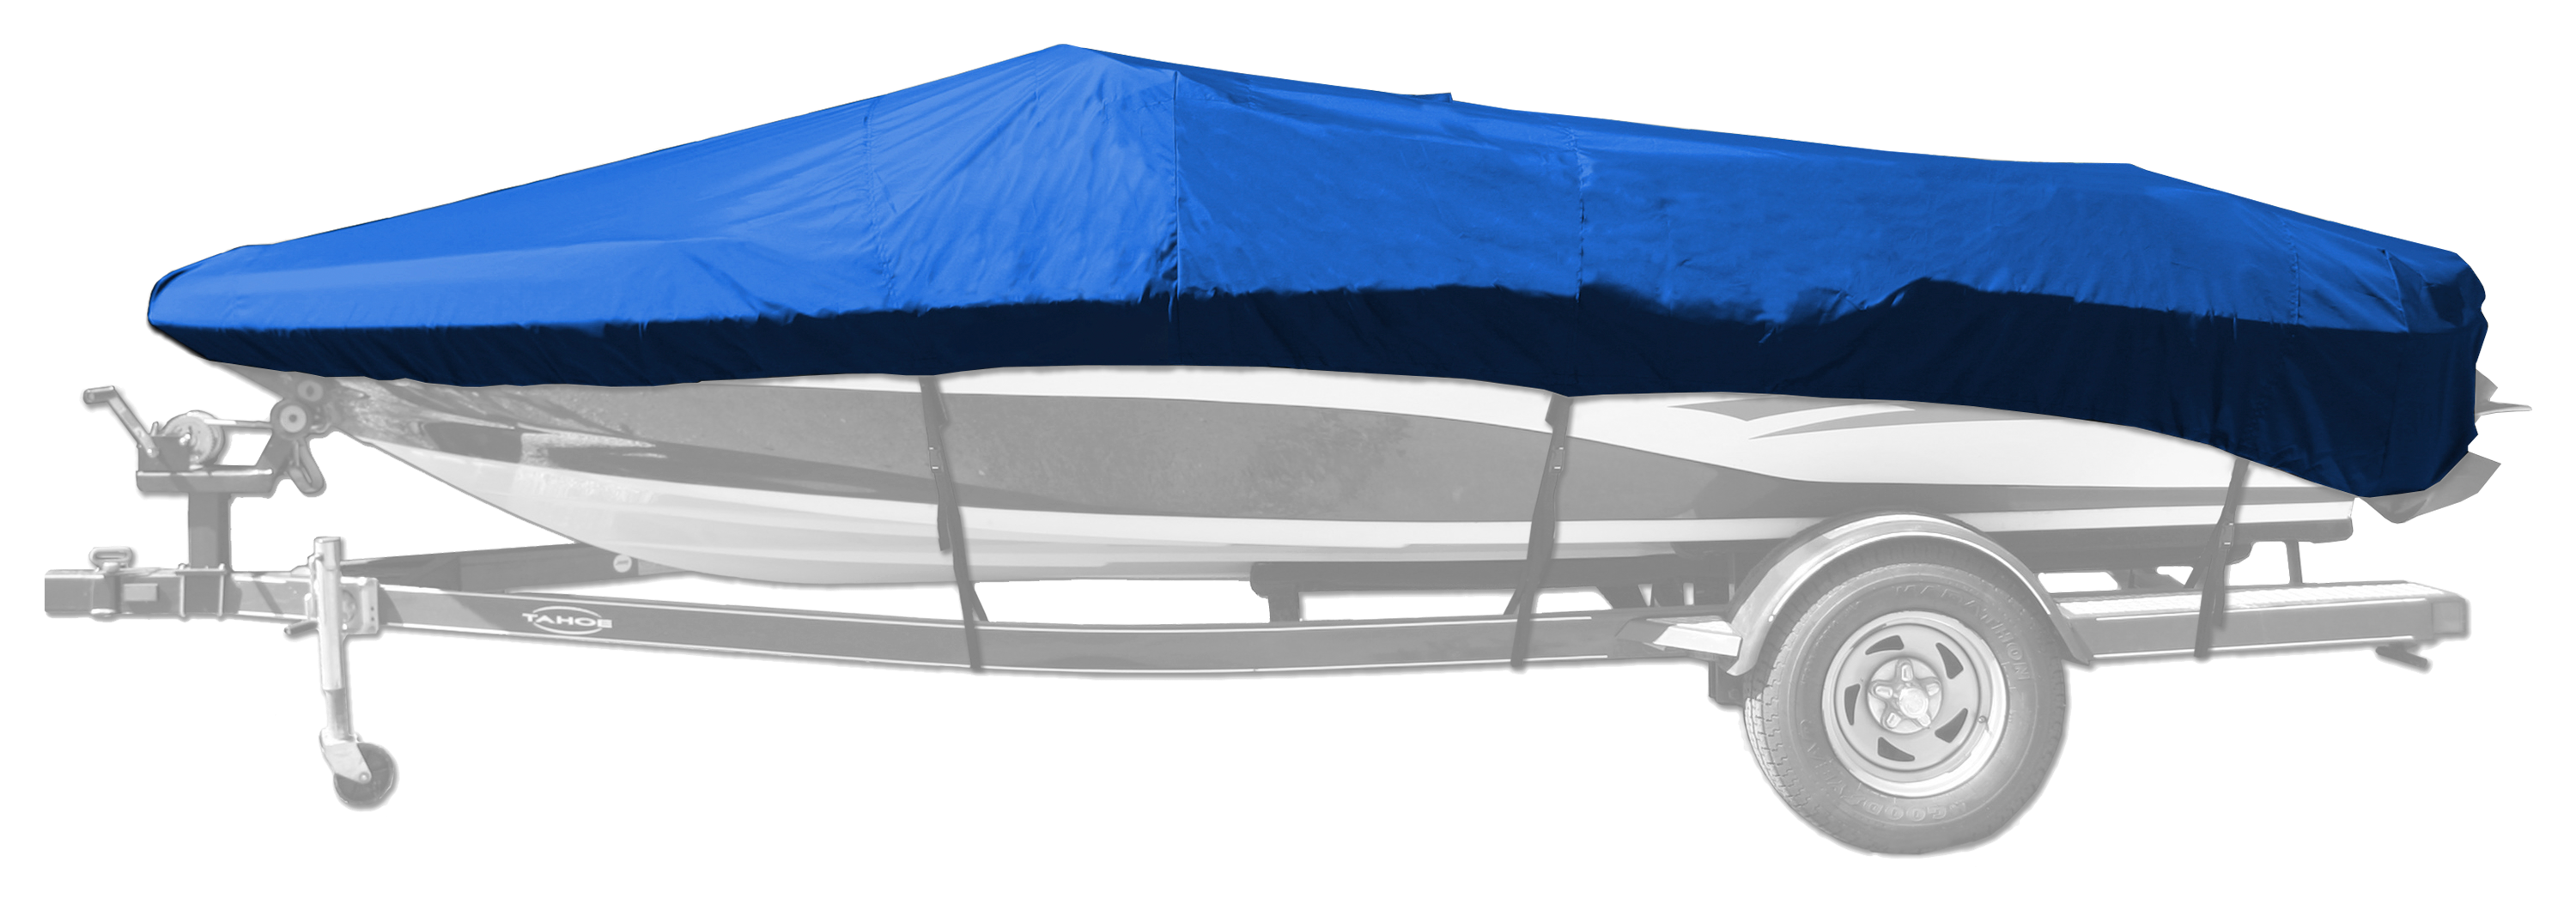 Bass Pro Shops Select Fit Hurricane Boat Cover by Westland for Euro V-Hull Runabout I/O Model - Blue - 18'6'' to 19'5